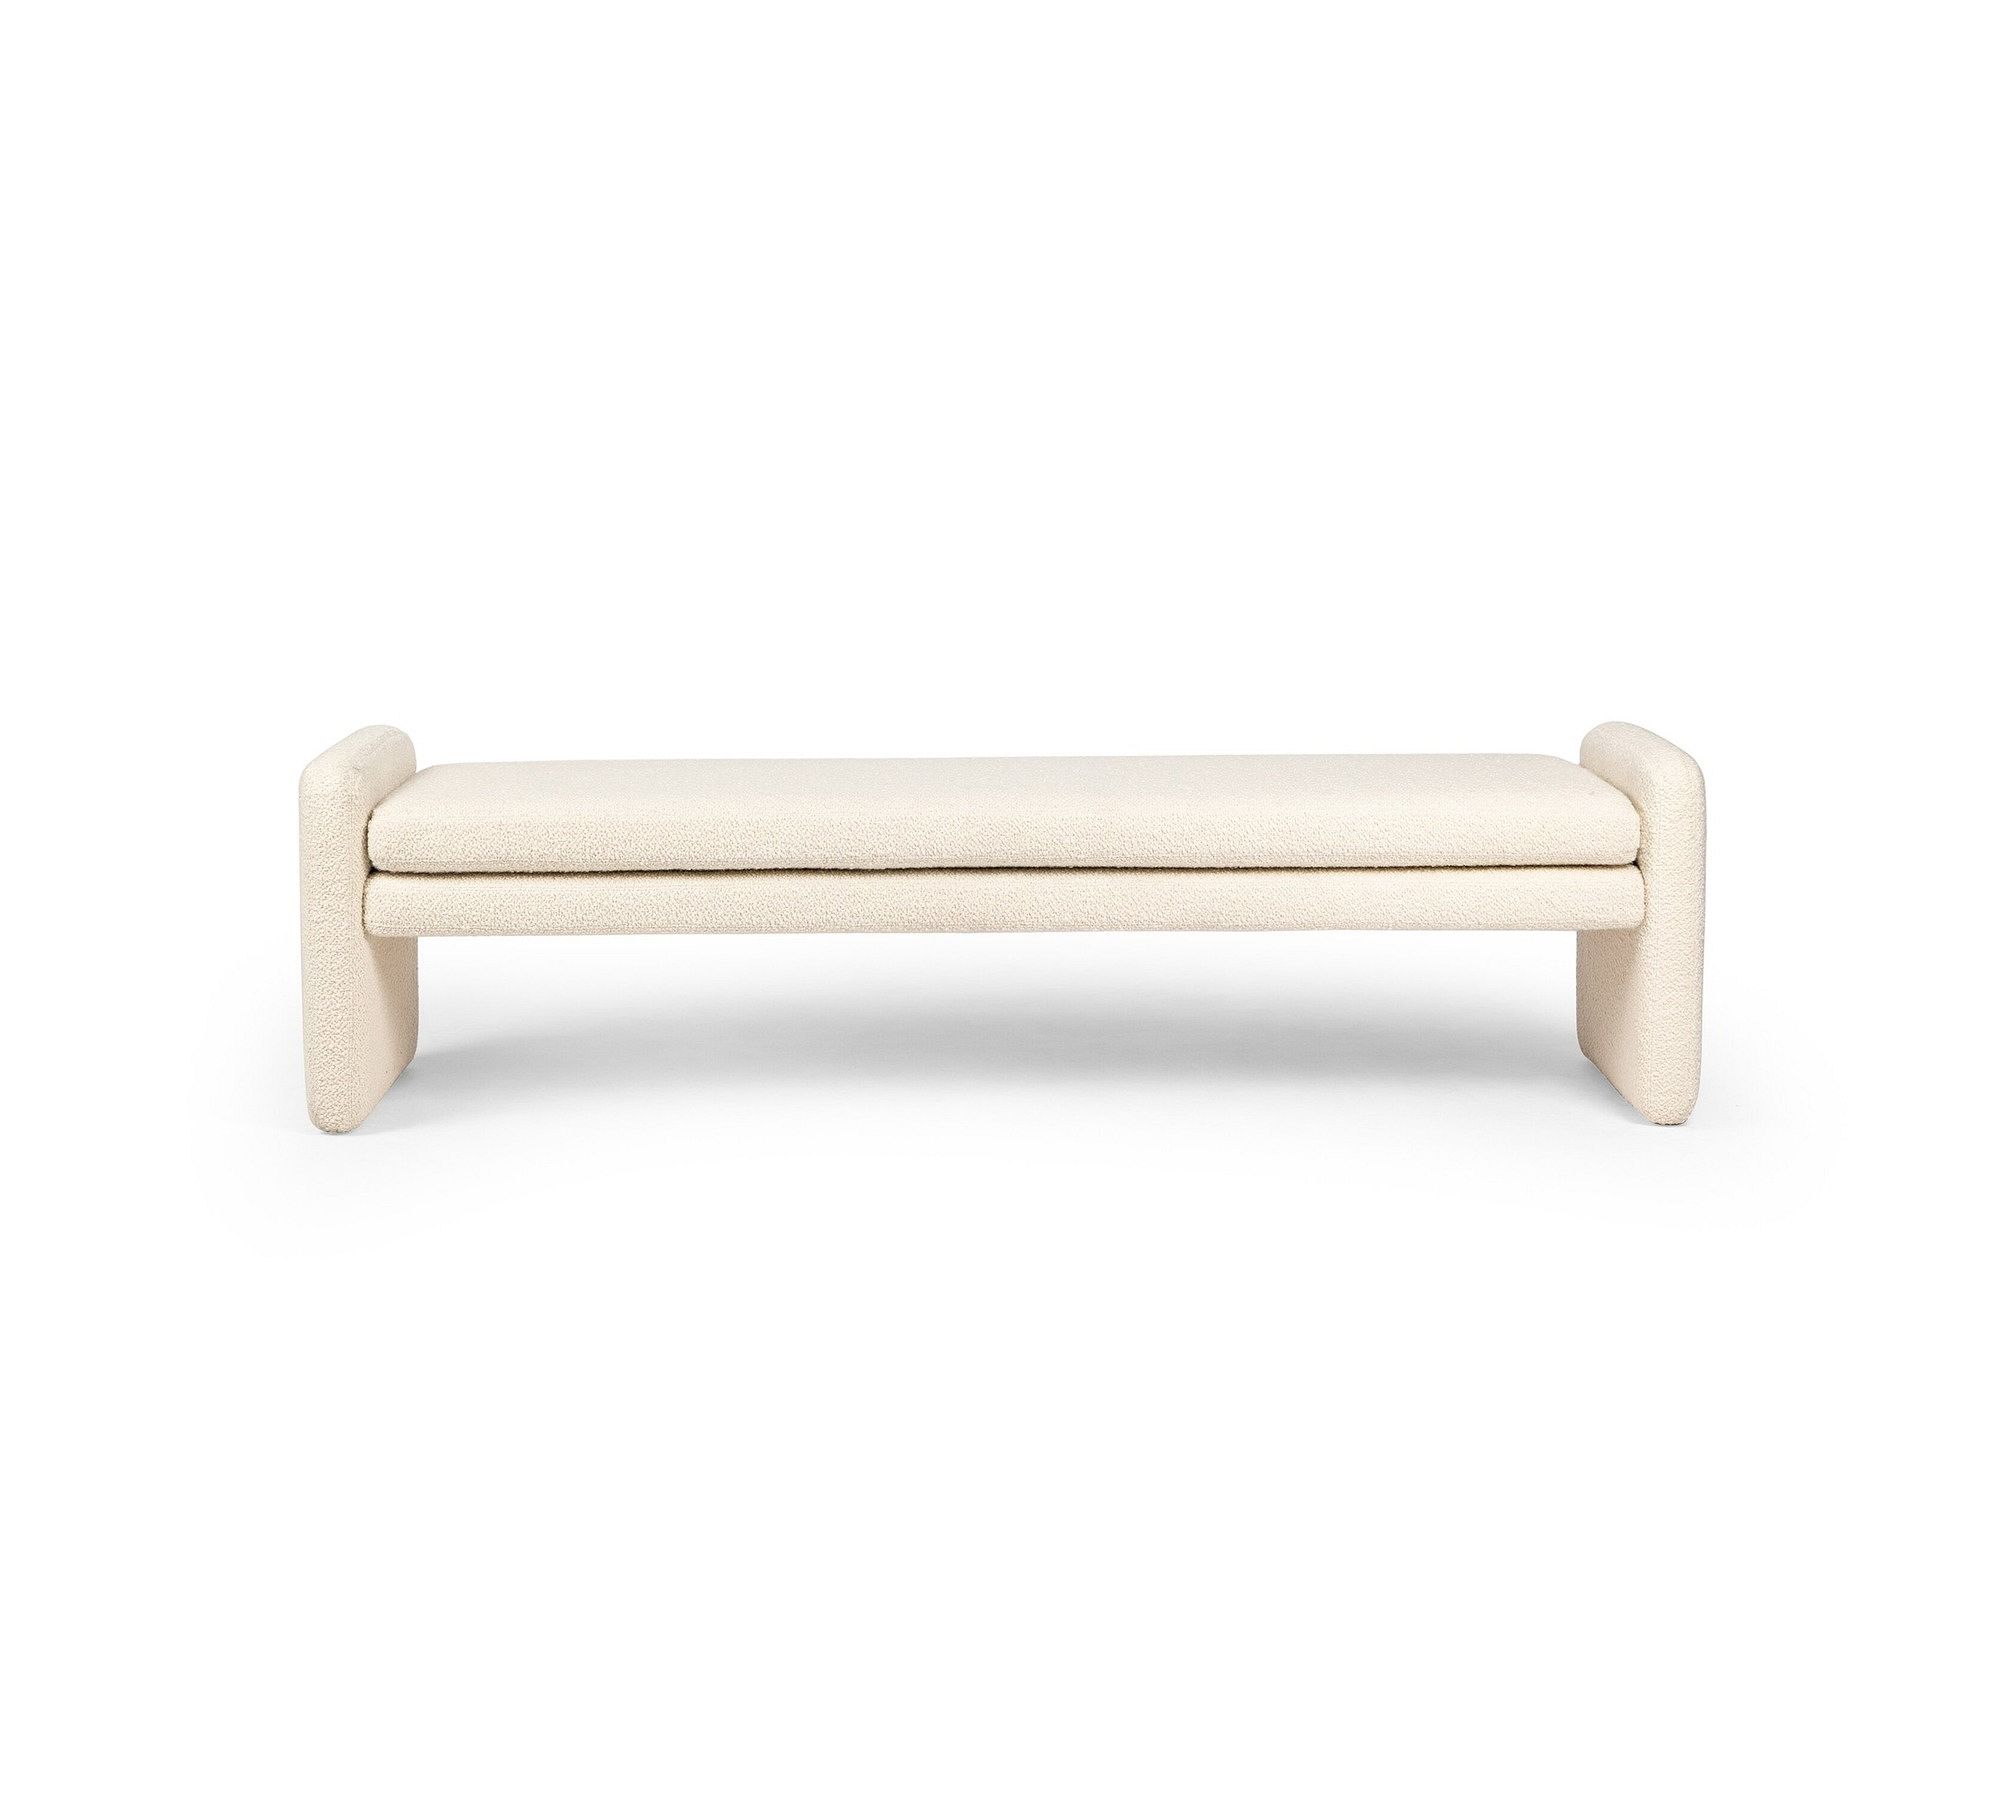 Raven Accent Bench